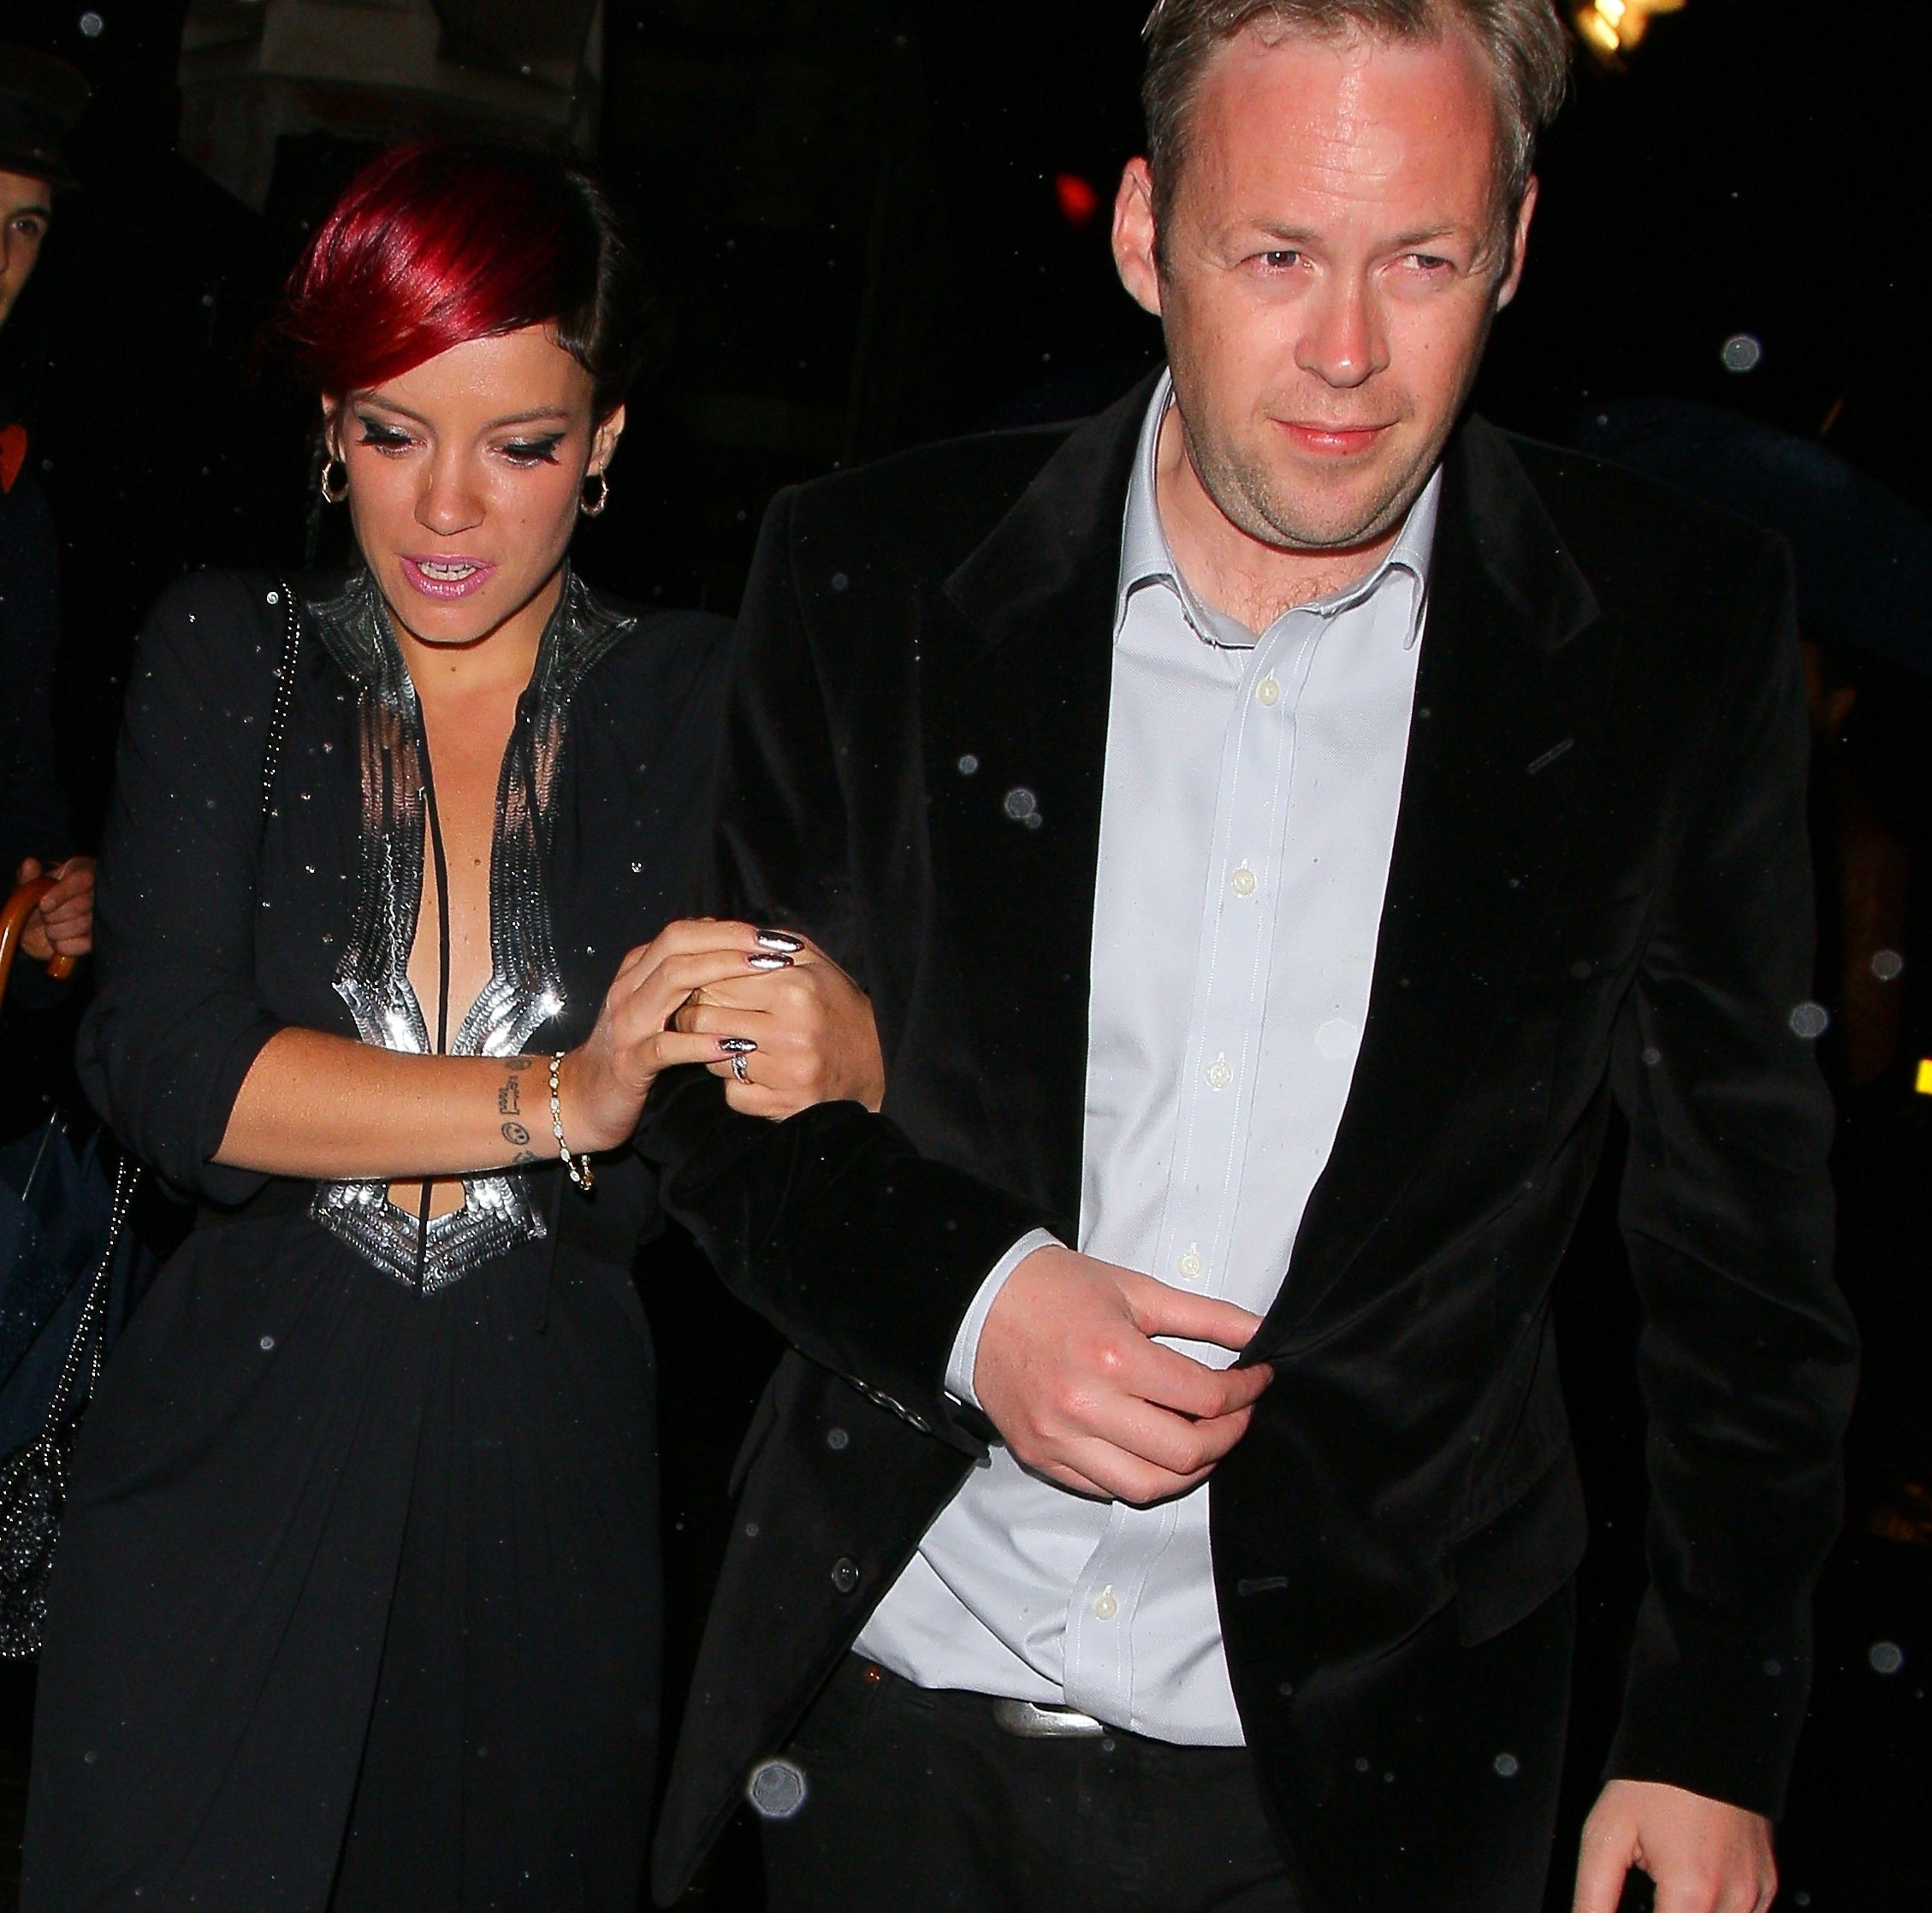 Lily Allen and Sam Cooper walk together, Allen in a black evening dress and Cooper in a suit